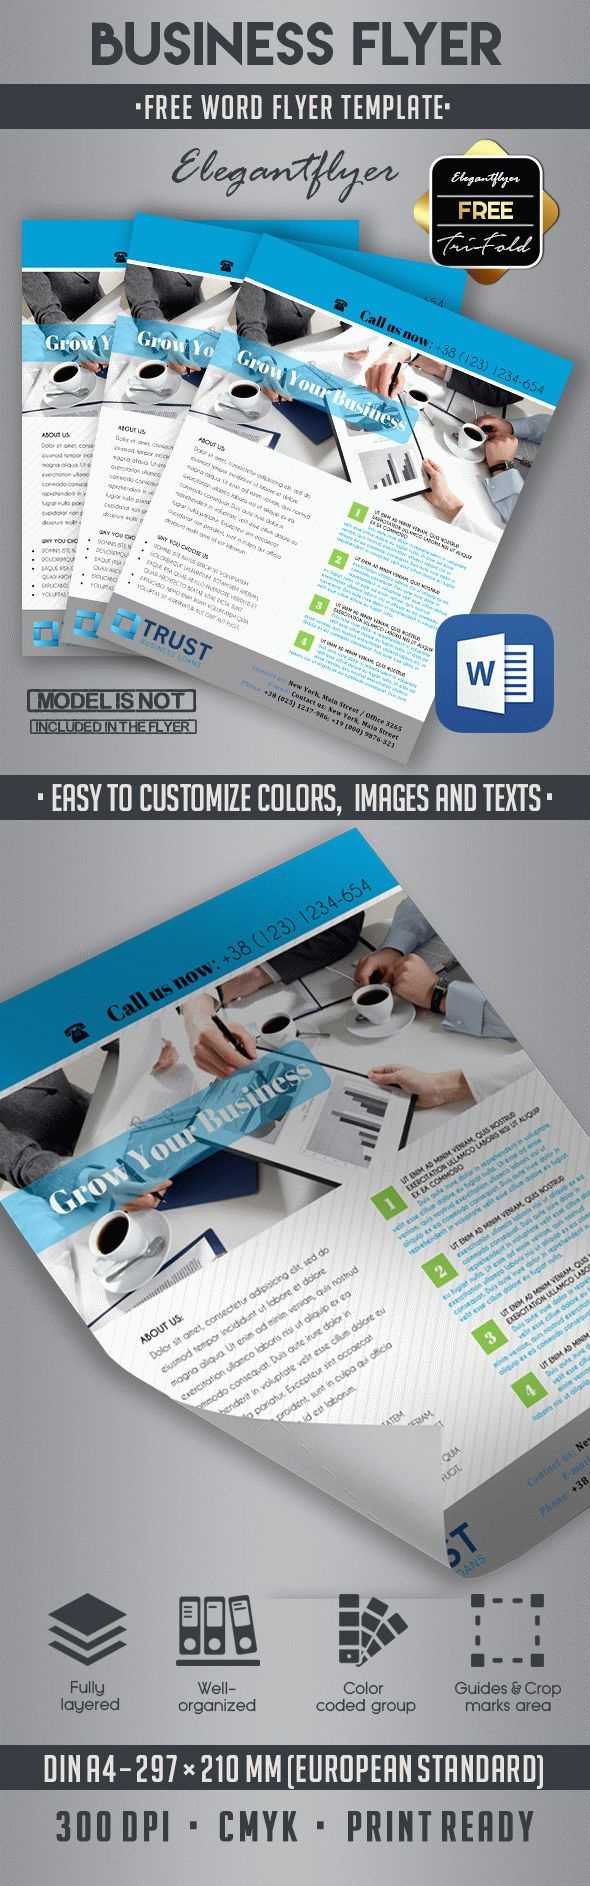 10 Best Business Flyer Templates In Word! |Elegantflyer In Free Business Flyer Templates For Microsoft Word